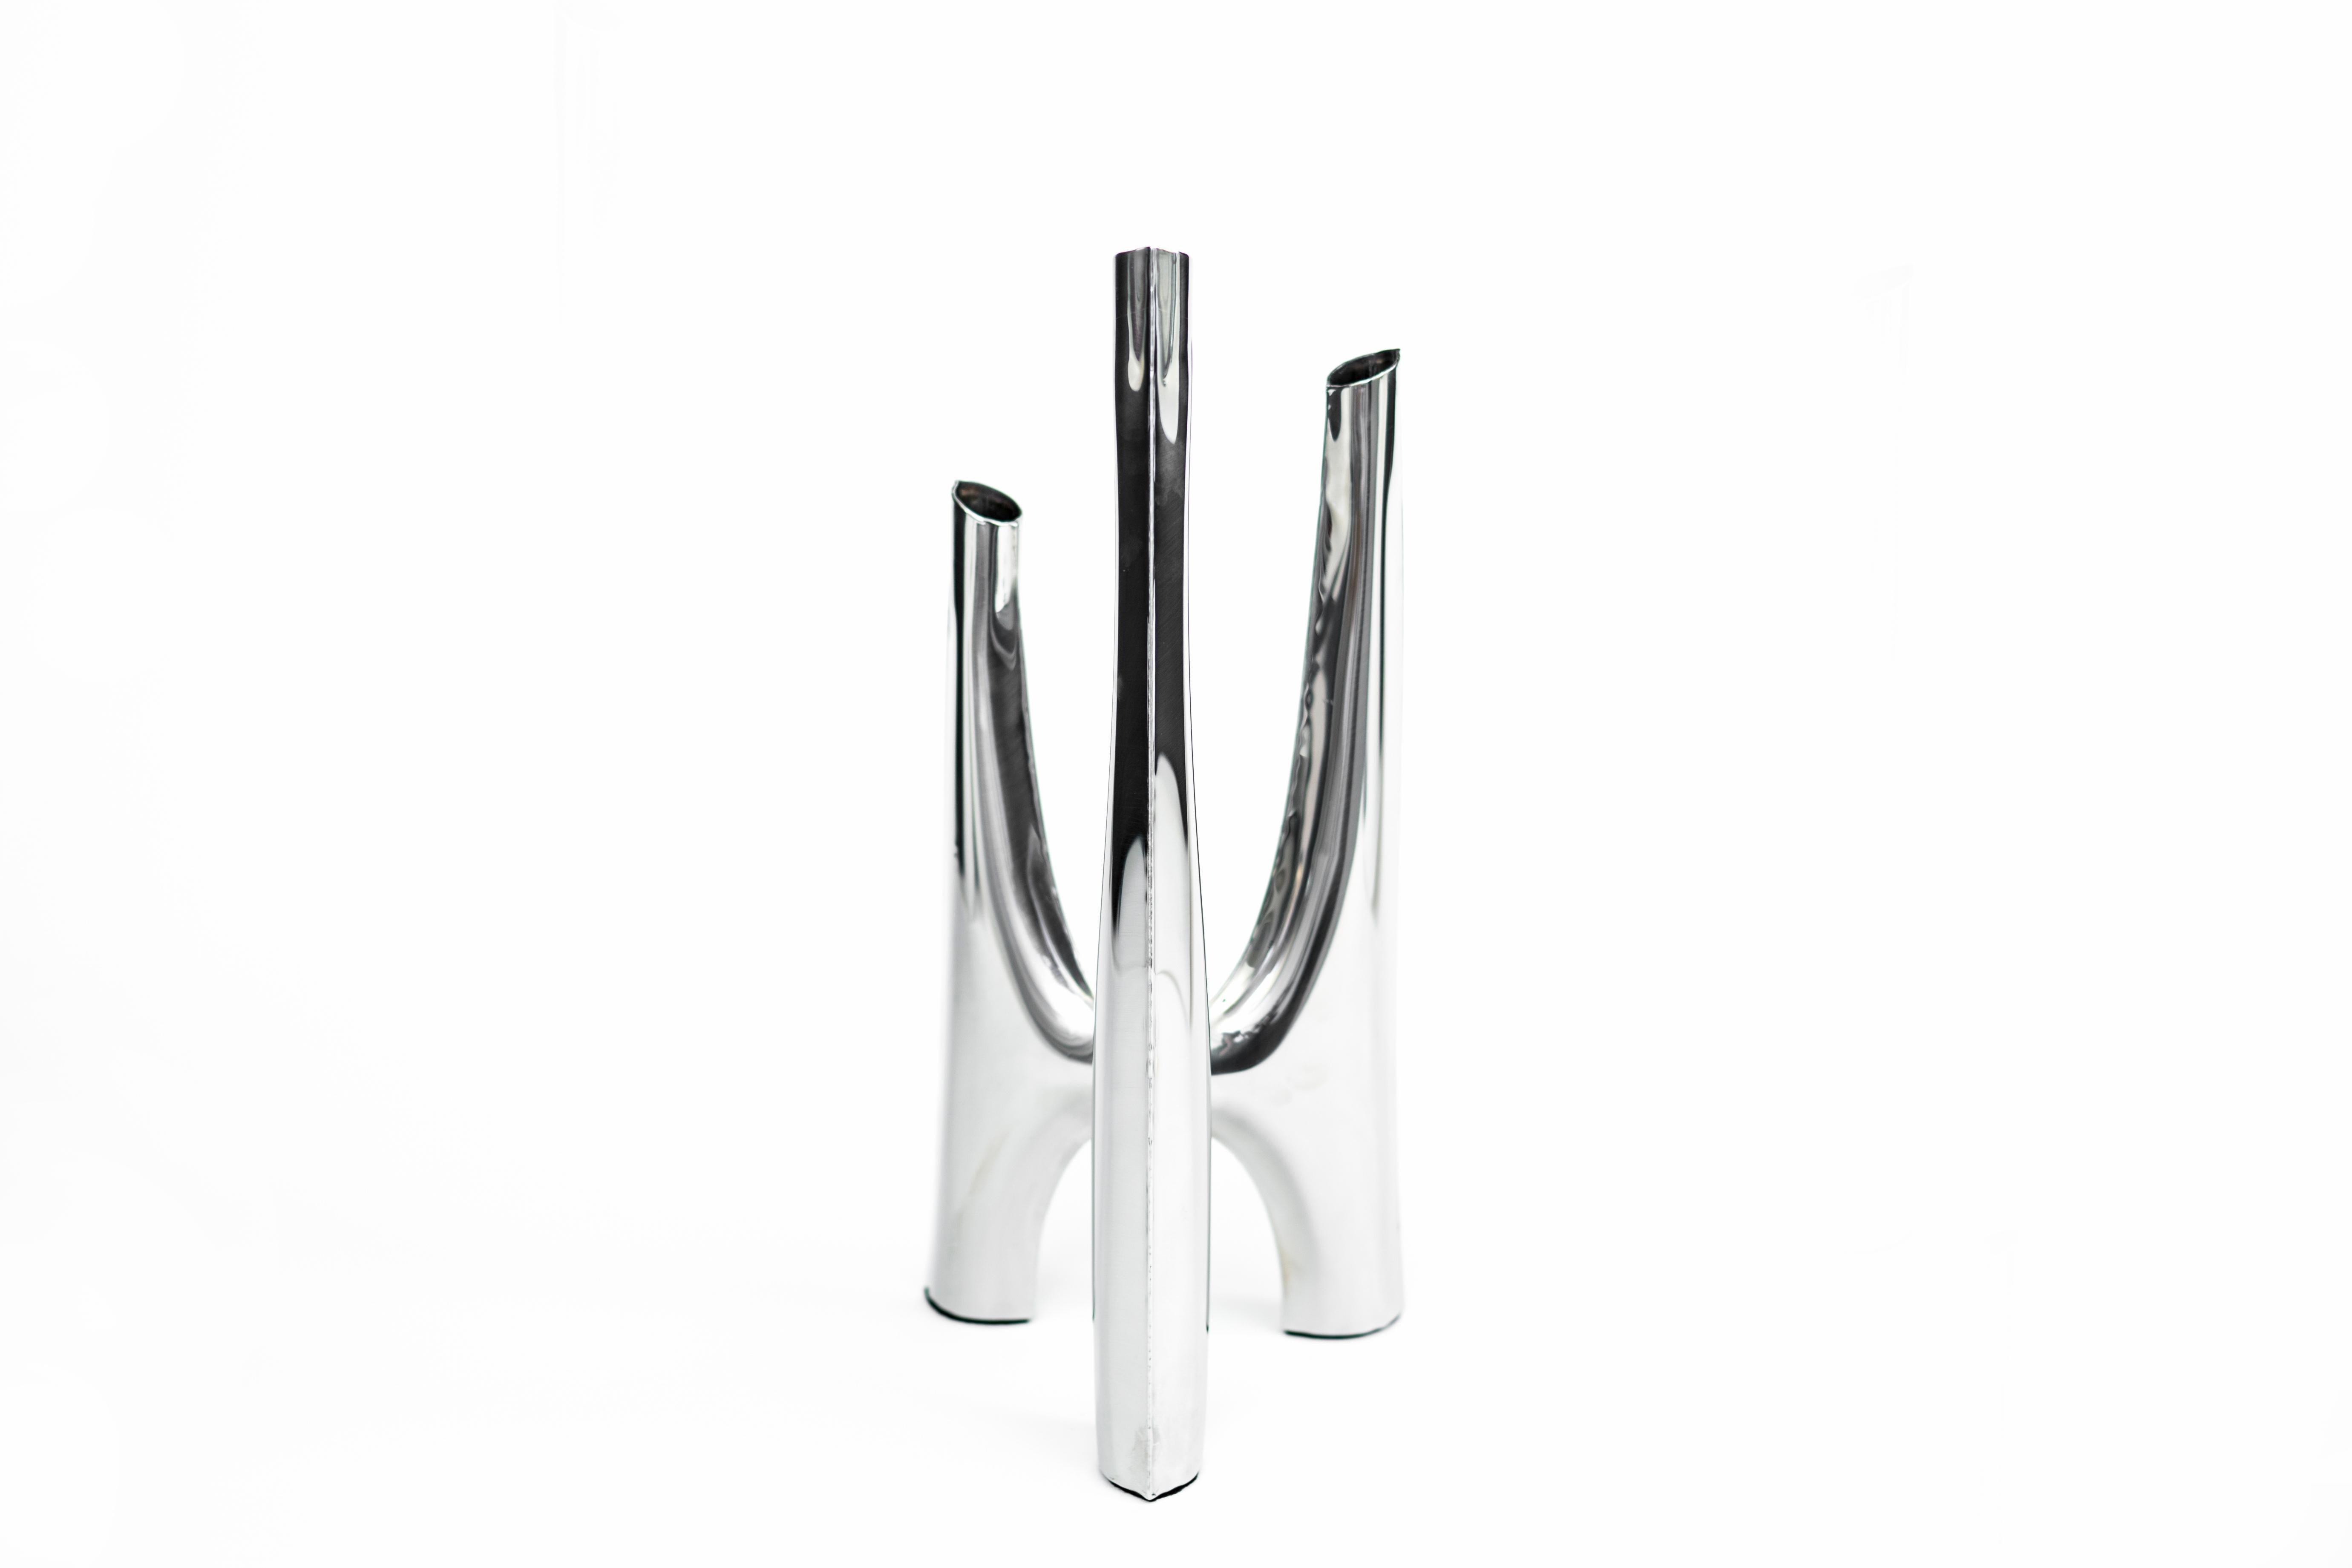 Triglav 41 candleholder by Zieta
Dimensions: W 19 x H 41 cm 
Material: Stainless steel. 
Finish: Polished. 
Available also in a larger version. Candles included.


Triglav is a steel candle holder from Zieta Studio, designed by Oskar Zieta and